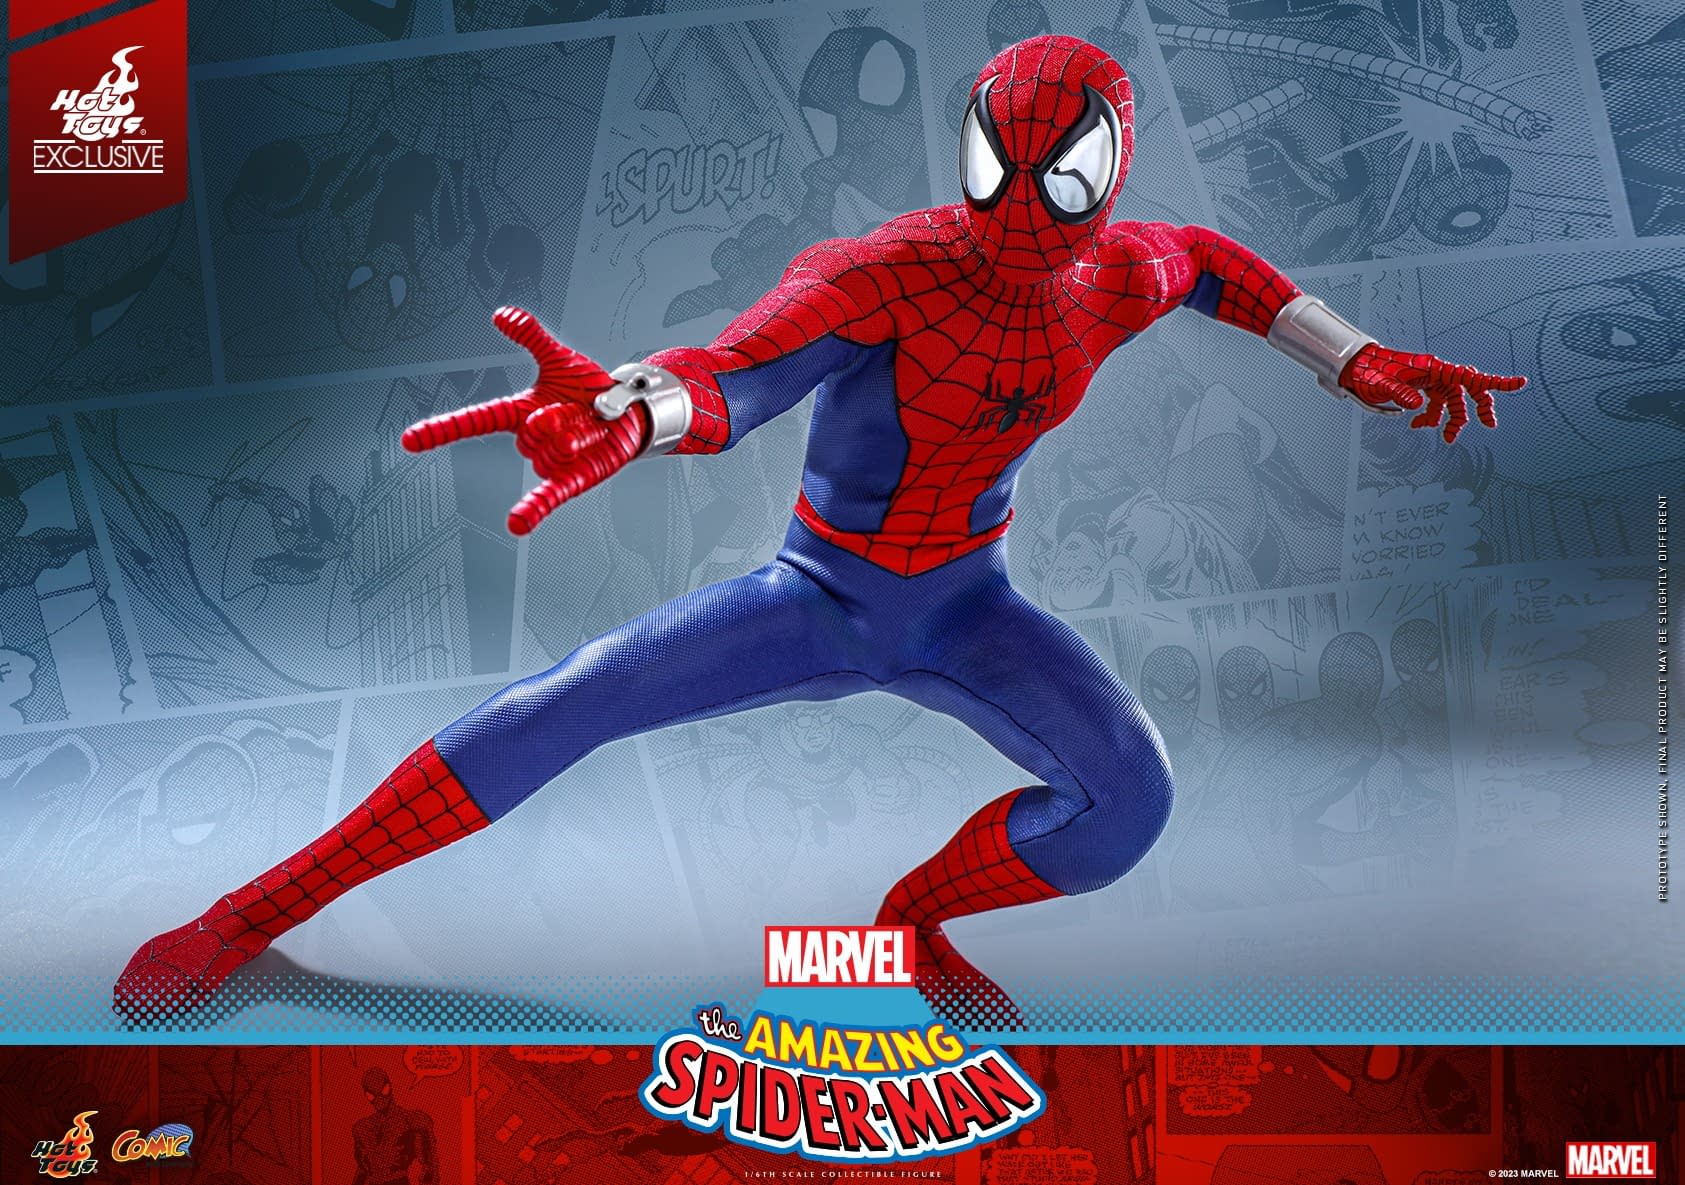 Spider-Man Receives Exclusive Marvel Comics 1/6 Figure from Hot Toys10